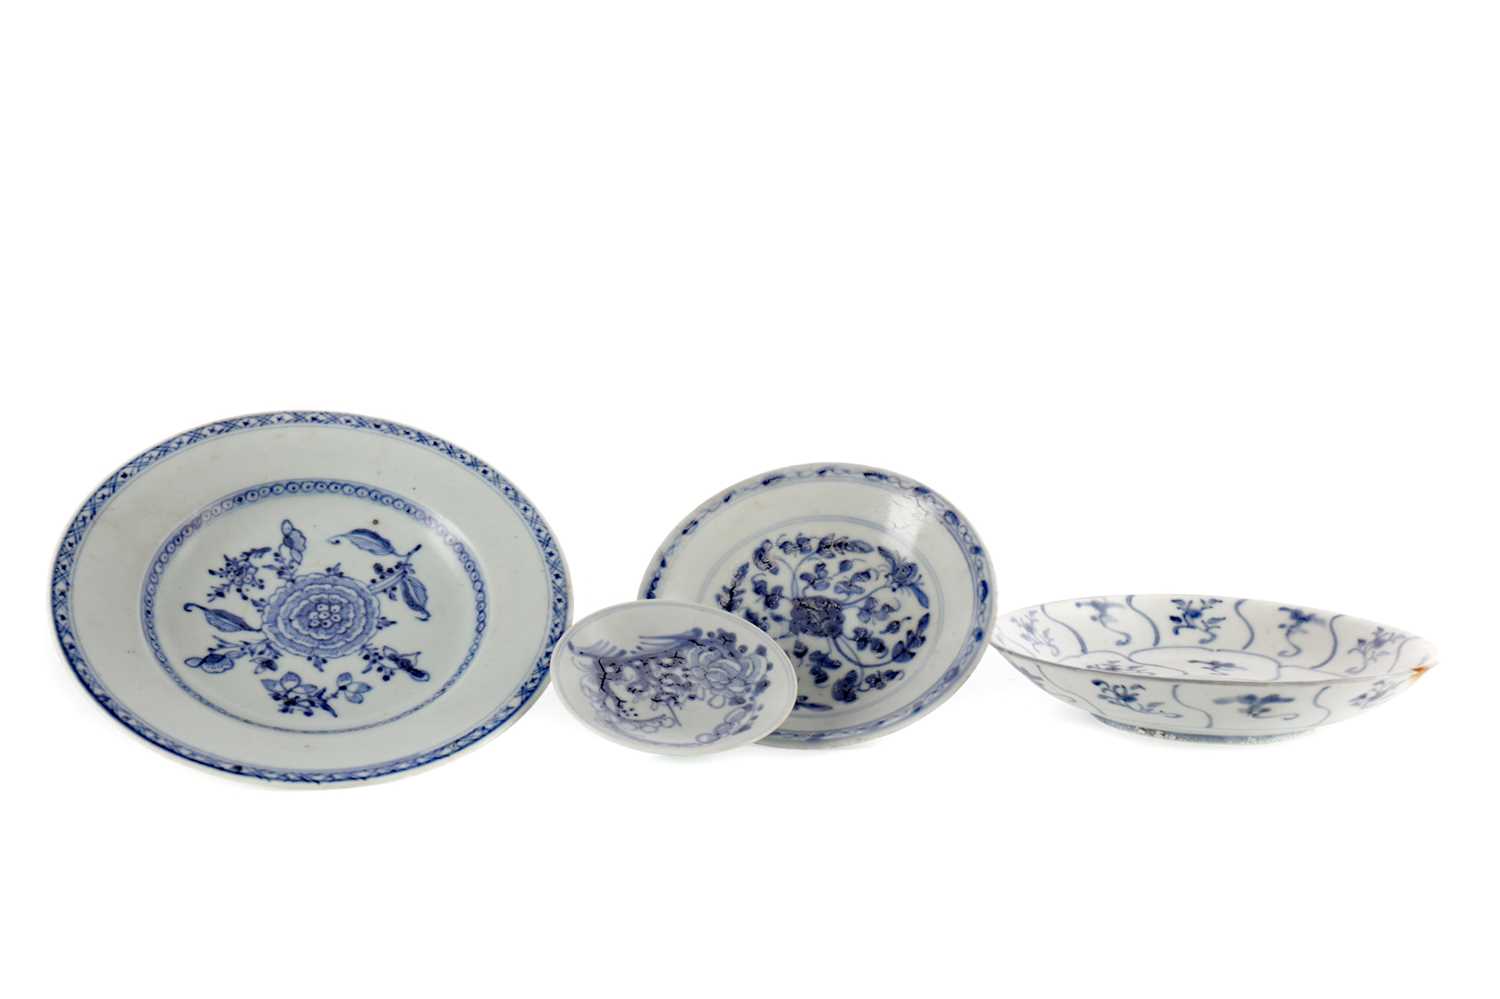 A GROUP OF FOUR CHINESE CIRCULAR PLATES FROM THE TREASURE OF THE TEK SING CARGO